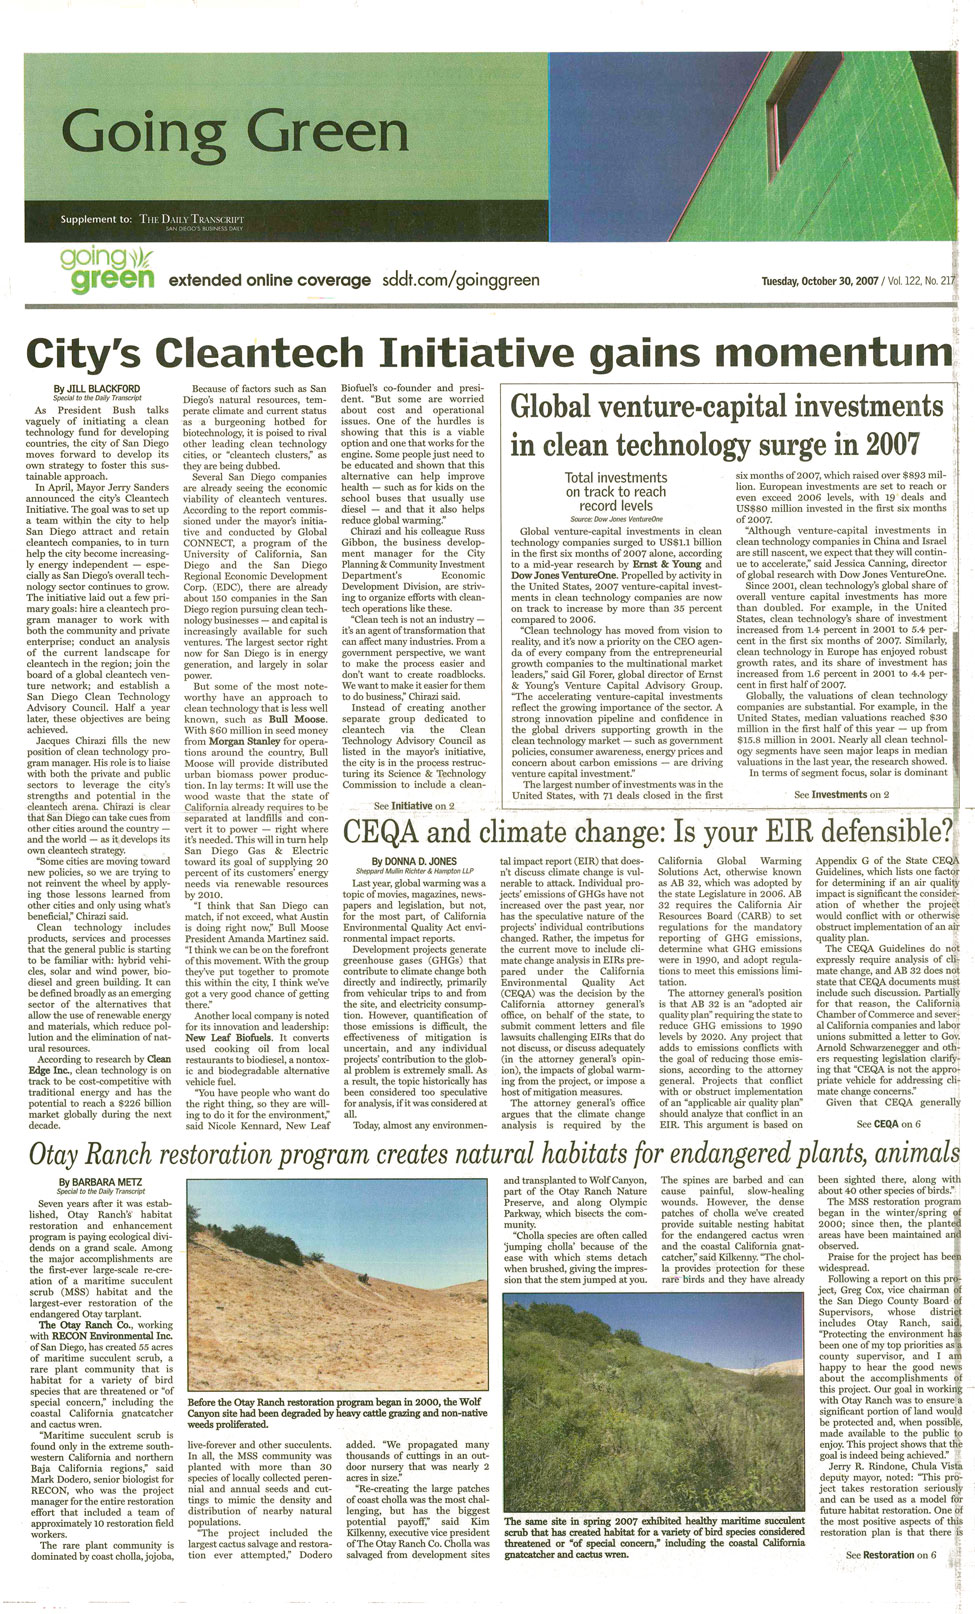 Otay Ranch Restoration Project article